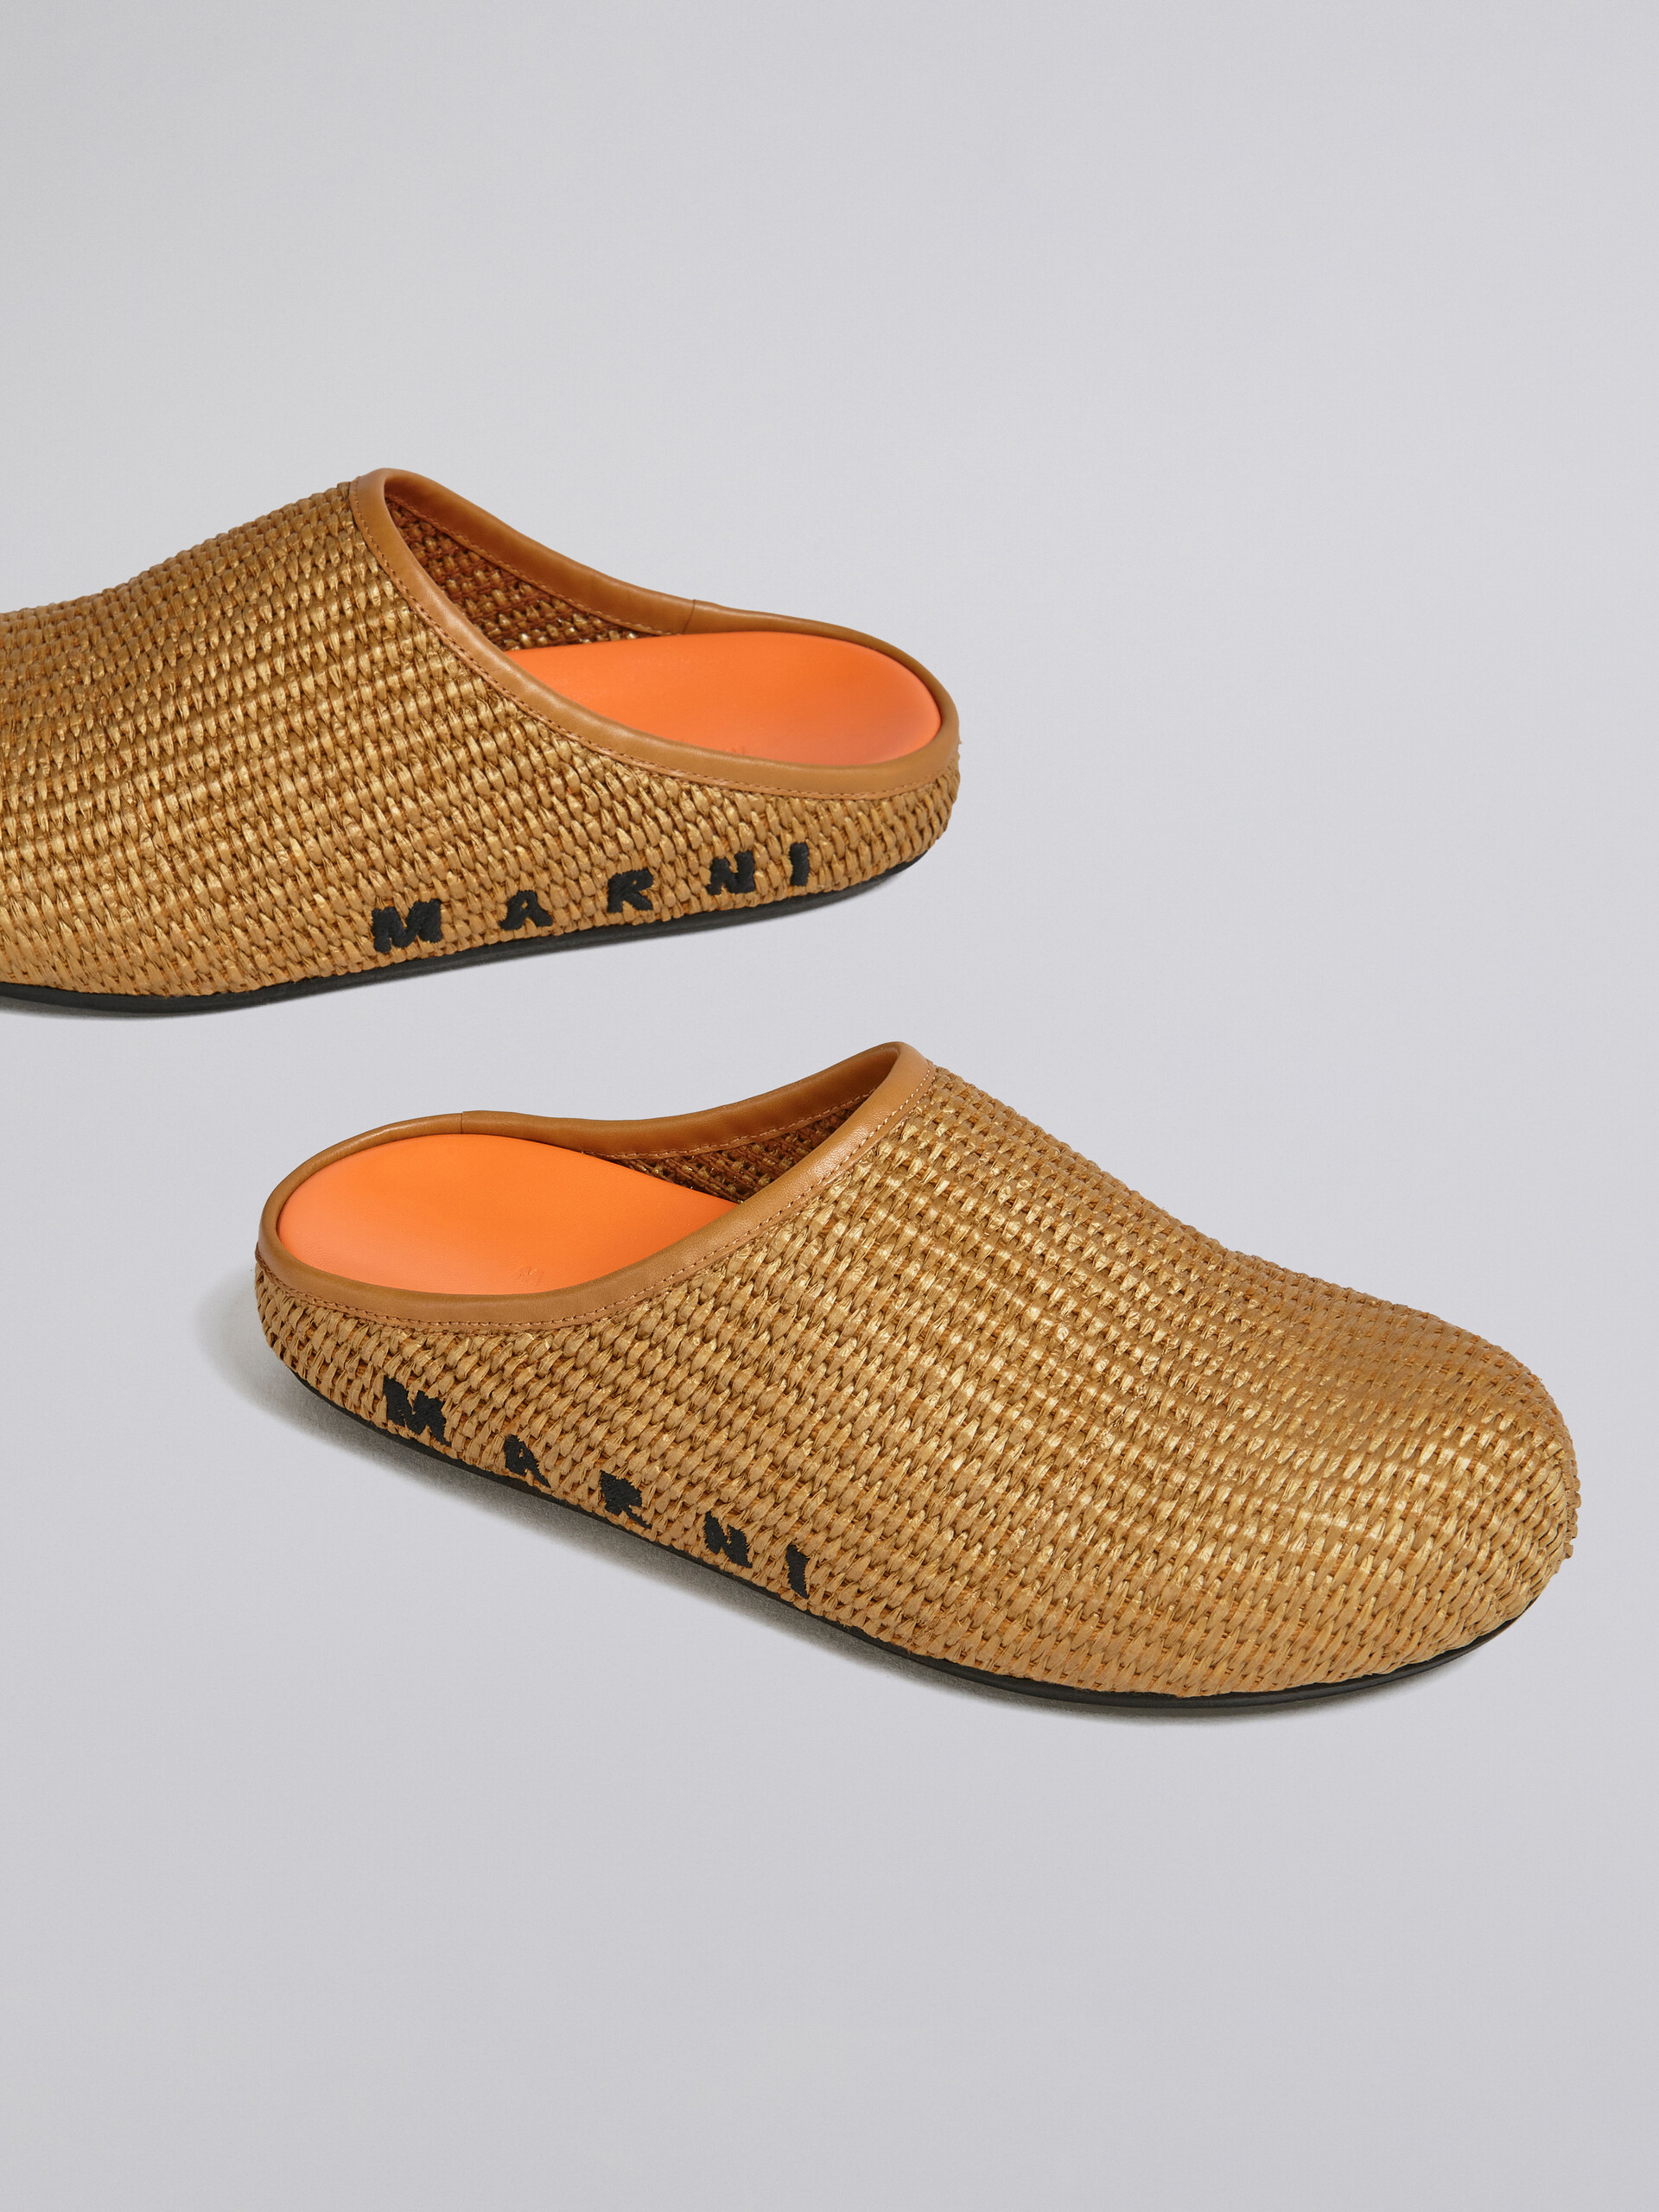 Brown raffia and leather Fussbett sabot - Clogs - Image 5